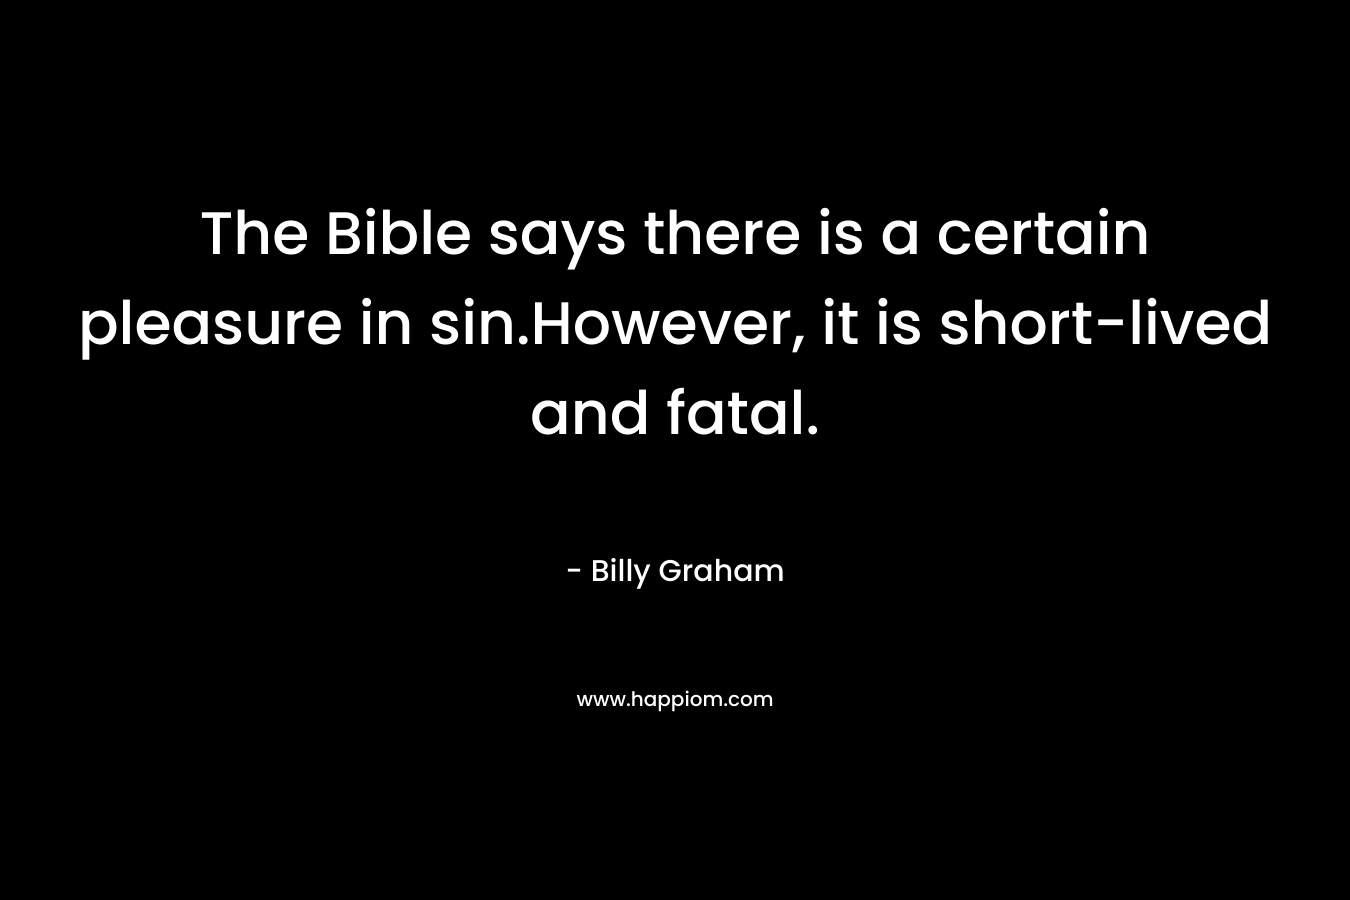 The Bible says there is a certain pleasure in sin.However, it is short-lived and fatal. – Billy Graham